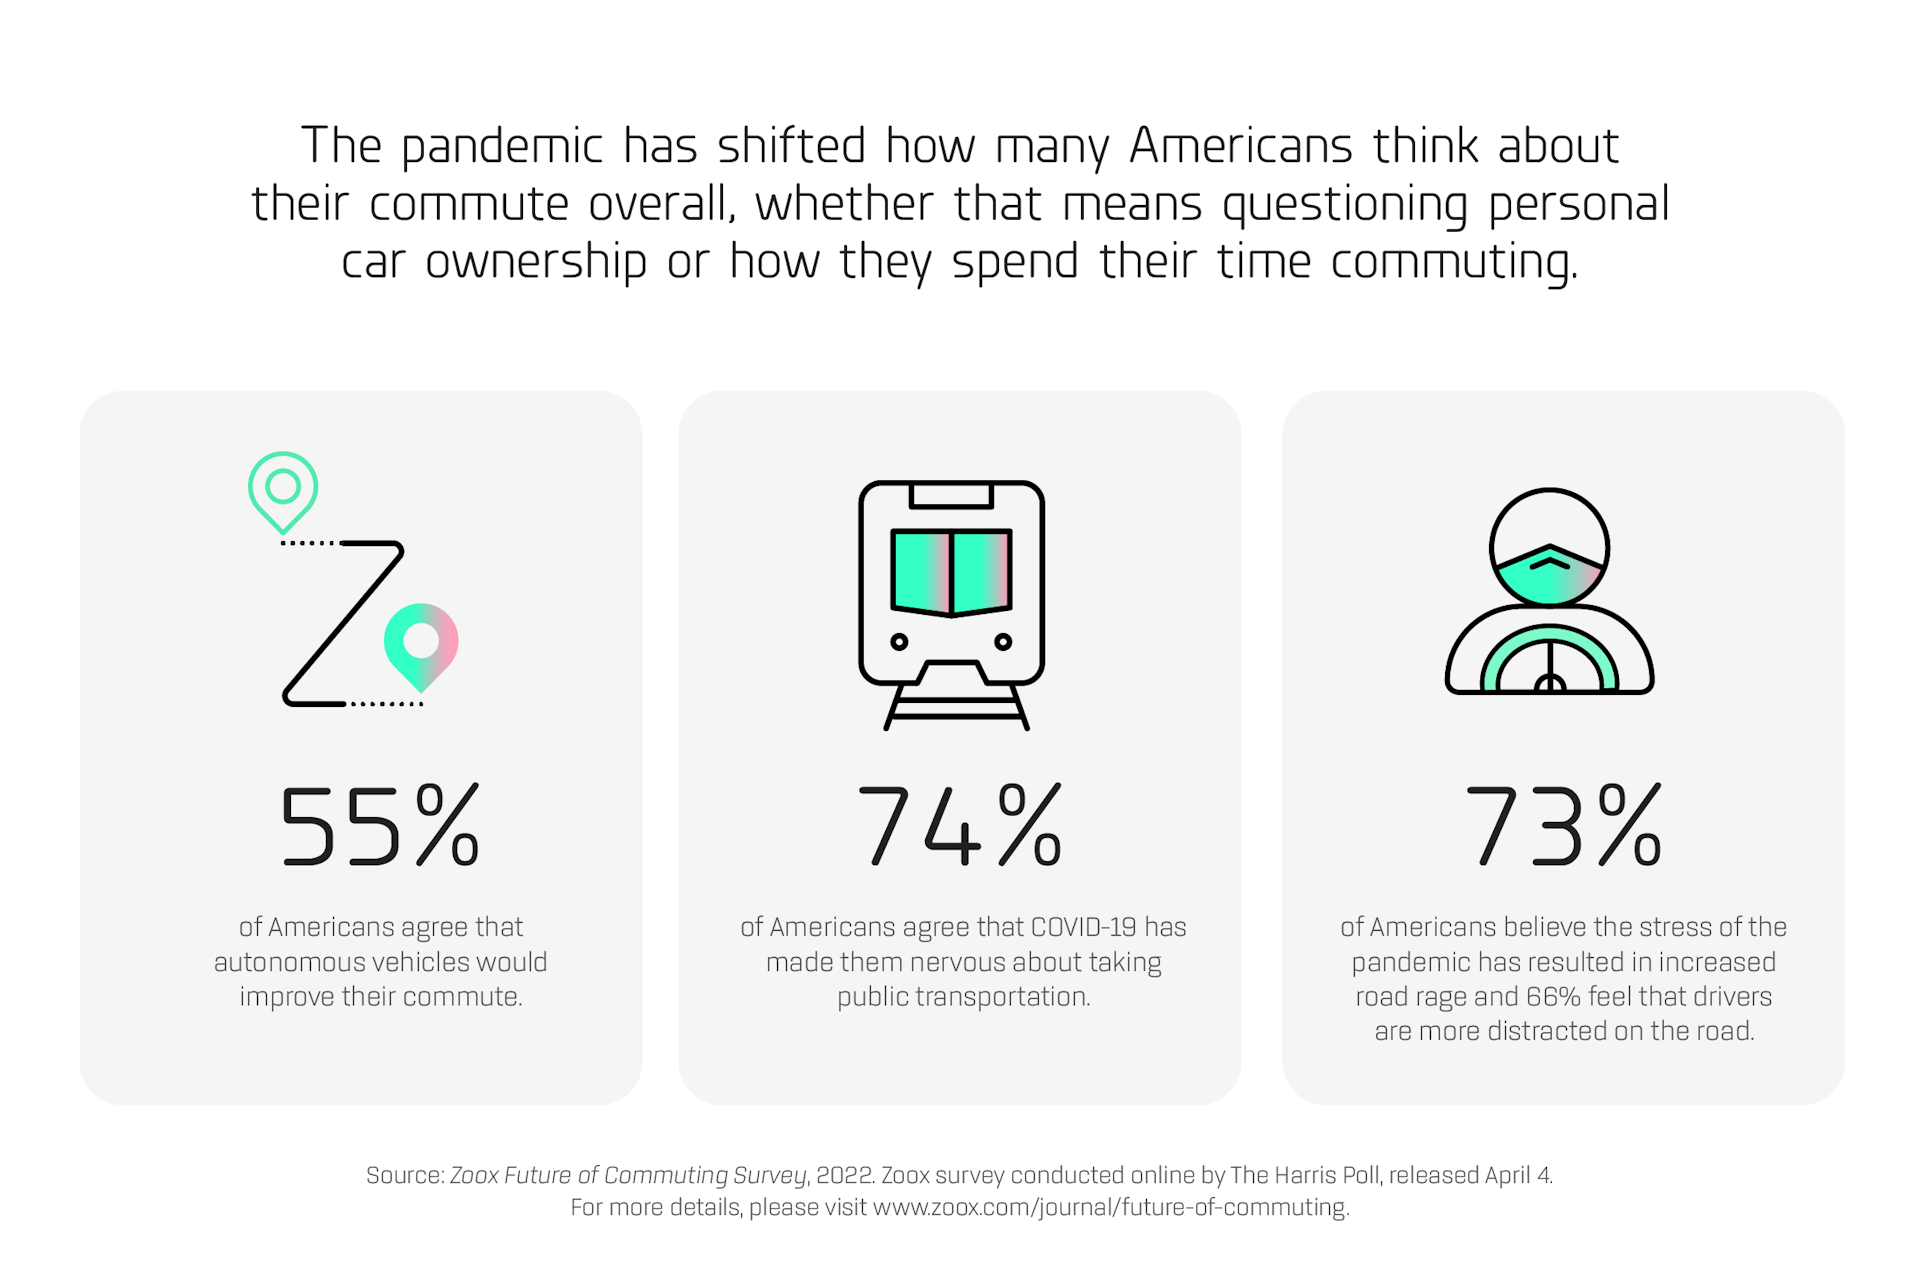 This image is an infographic from a survey about the future of transportation and commuting conducted by autonomous vehicle company, Zoox, and market research firm, the Harris Poll. This infographic shows the results of three questions about what Americans think about their commute. The infographic includes three columns that each have an illustration at the top of the column, a percentage in the middle of the column, and a written description at the bottom of the column. At the bottom of the infographic there are directions to visit www.zoox.com/journal/future-of-commuting for more information. The first column has an illustration of the letter “Z” made to look like a road with an icon at each end to denote a starting and ending point. It includes the stat: 55% of Americans agree that autonomous vehicles would improve their commute. The second column has an illustration of the front of a commuter train on tracks. It includes the stat: 74% of Americans agree that COVID-19 has made them nervous about taking public transportation. The third column has an illustration of a faceless head on an upper body. The face has a mouth that is turned upside down in a frown. A steering wheel is drawn on the chest, as if the person is sitting in a car. It includes the stat: 73% of Americans believe that the stress of the pandemic has resulted in increased road rage and 66% feel that drivers are more distracted on the road.